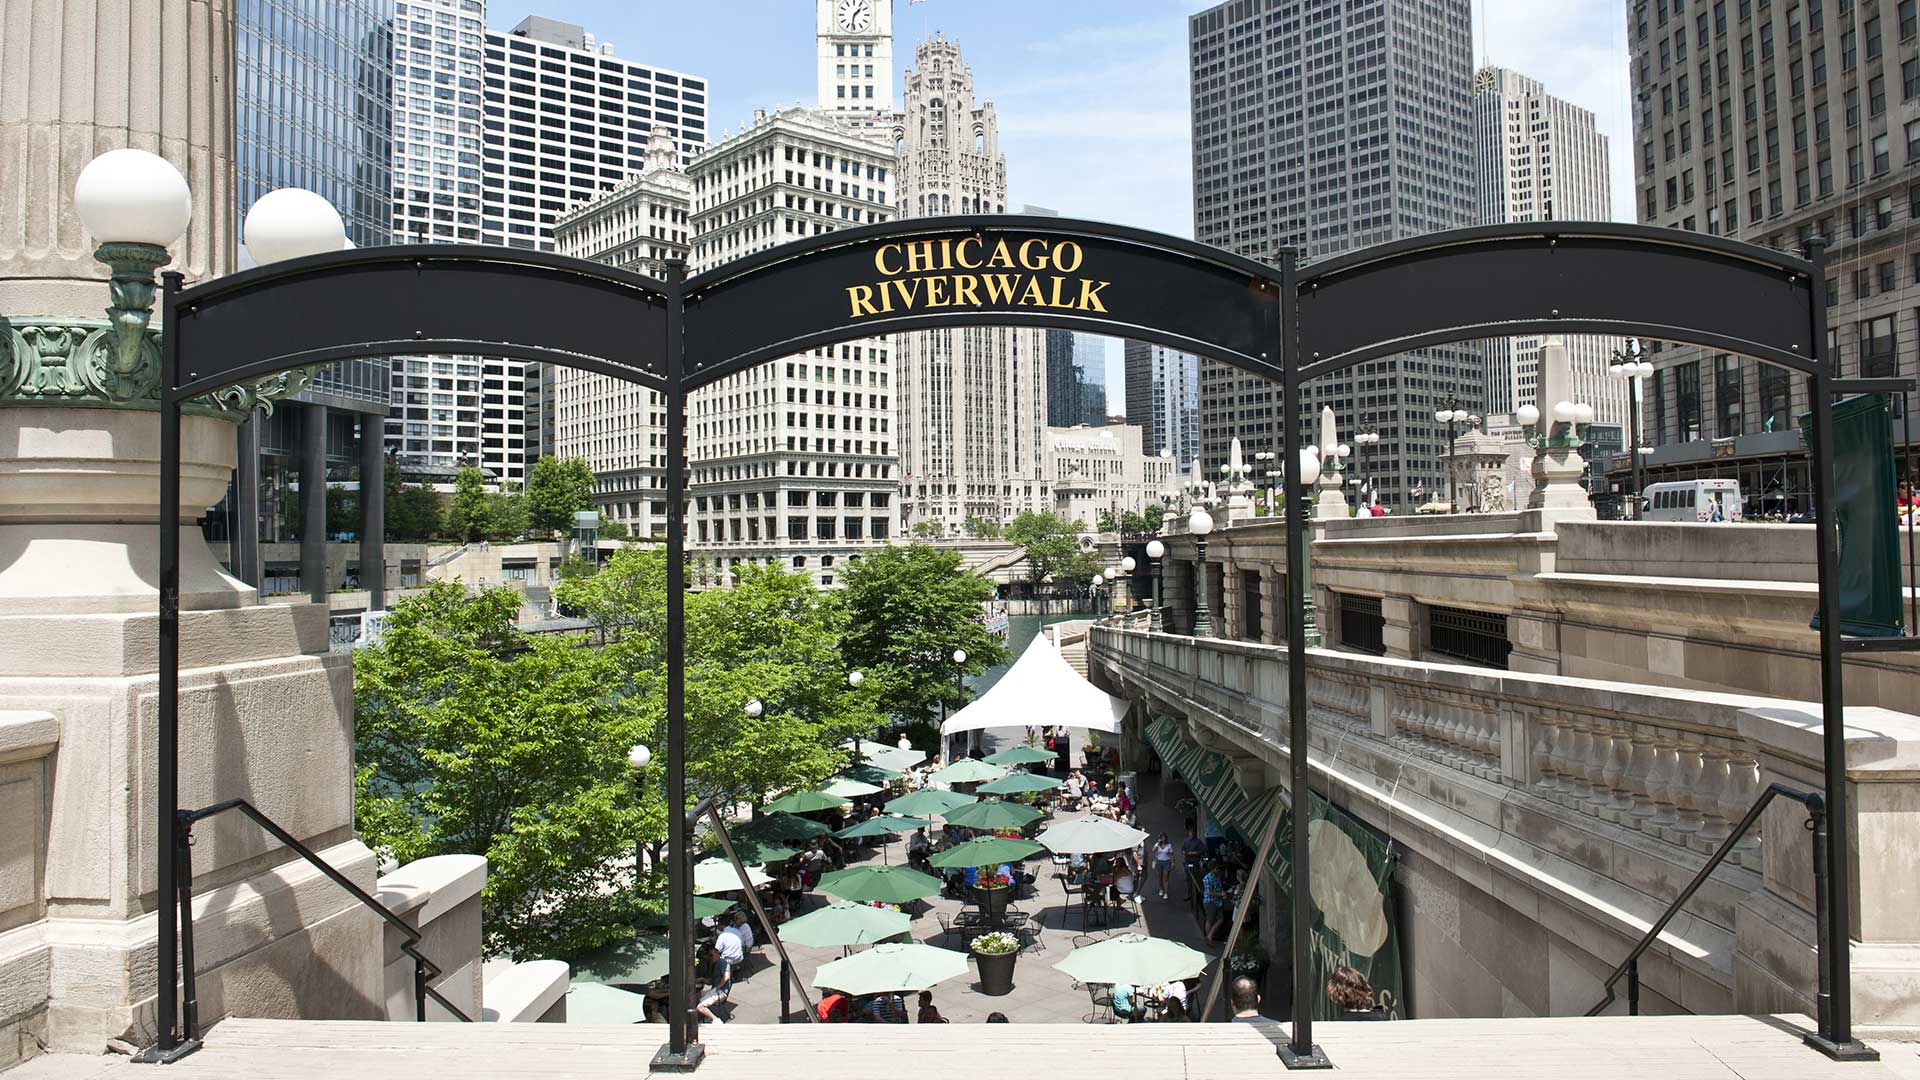 Standing at the top of a staircase leading down to the Chicago Riverwalk. A sign that reads “Chicago Riverwalk” arches over the top of the stairs. There are café tables and open umbrellas seen below, as well as many trees. There are city building all around.